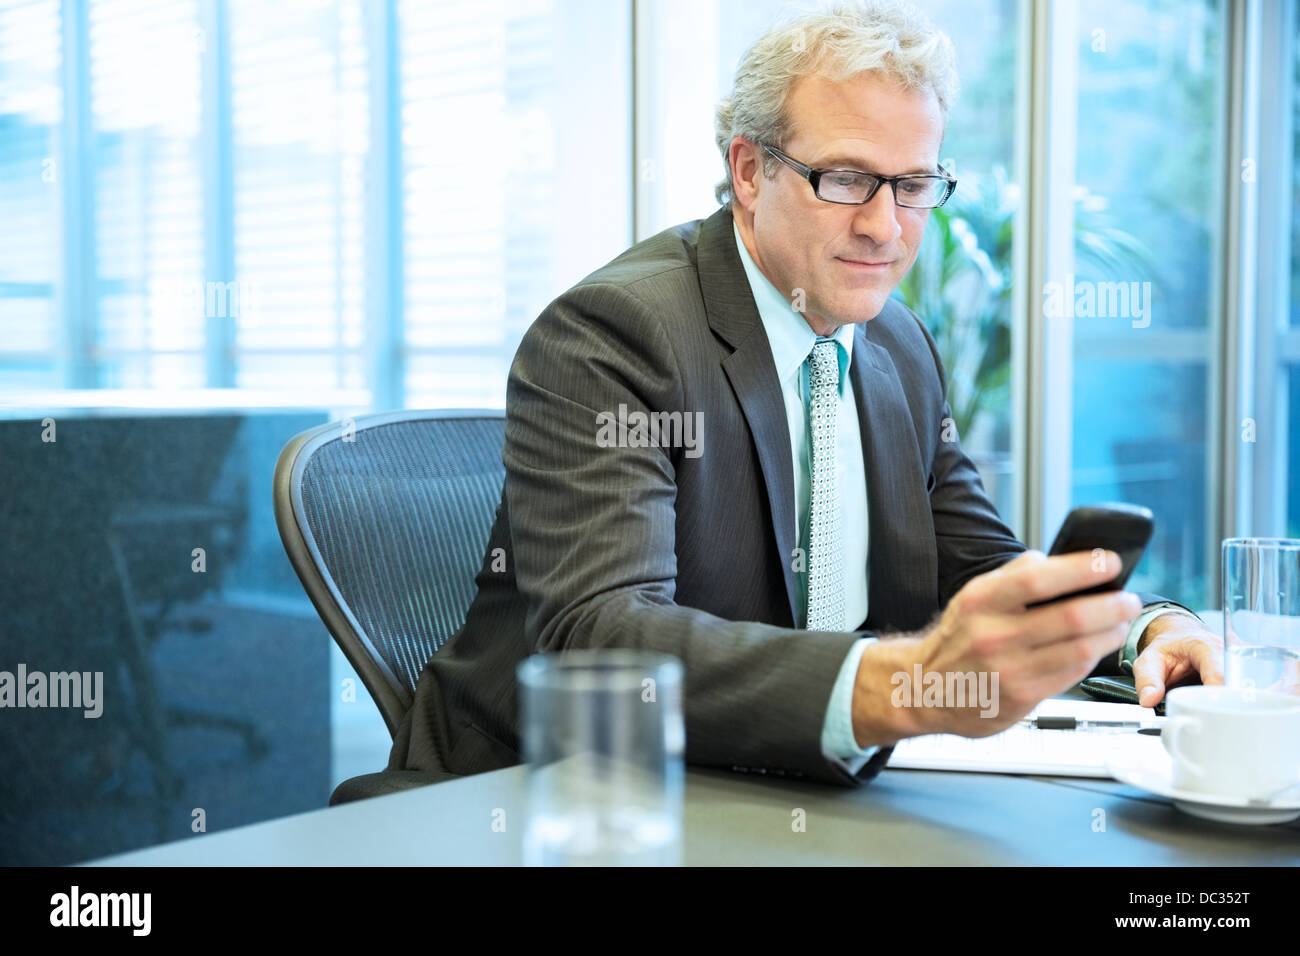 Businessman text messaging with cell phone in conference room Stock Photo